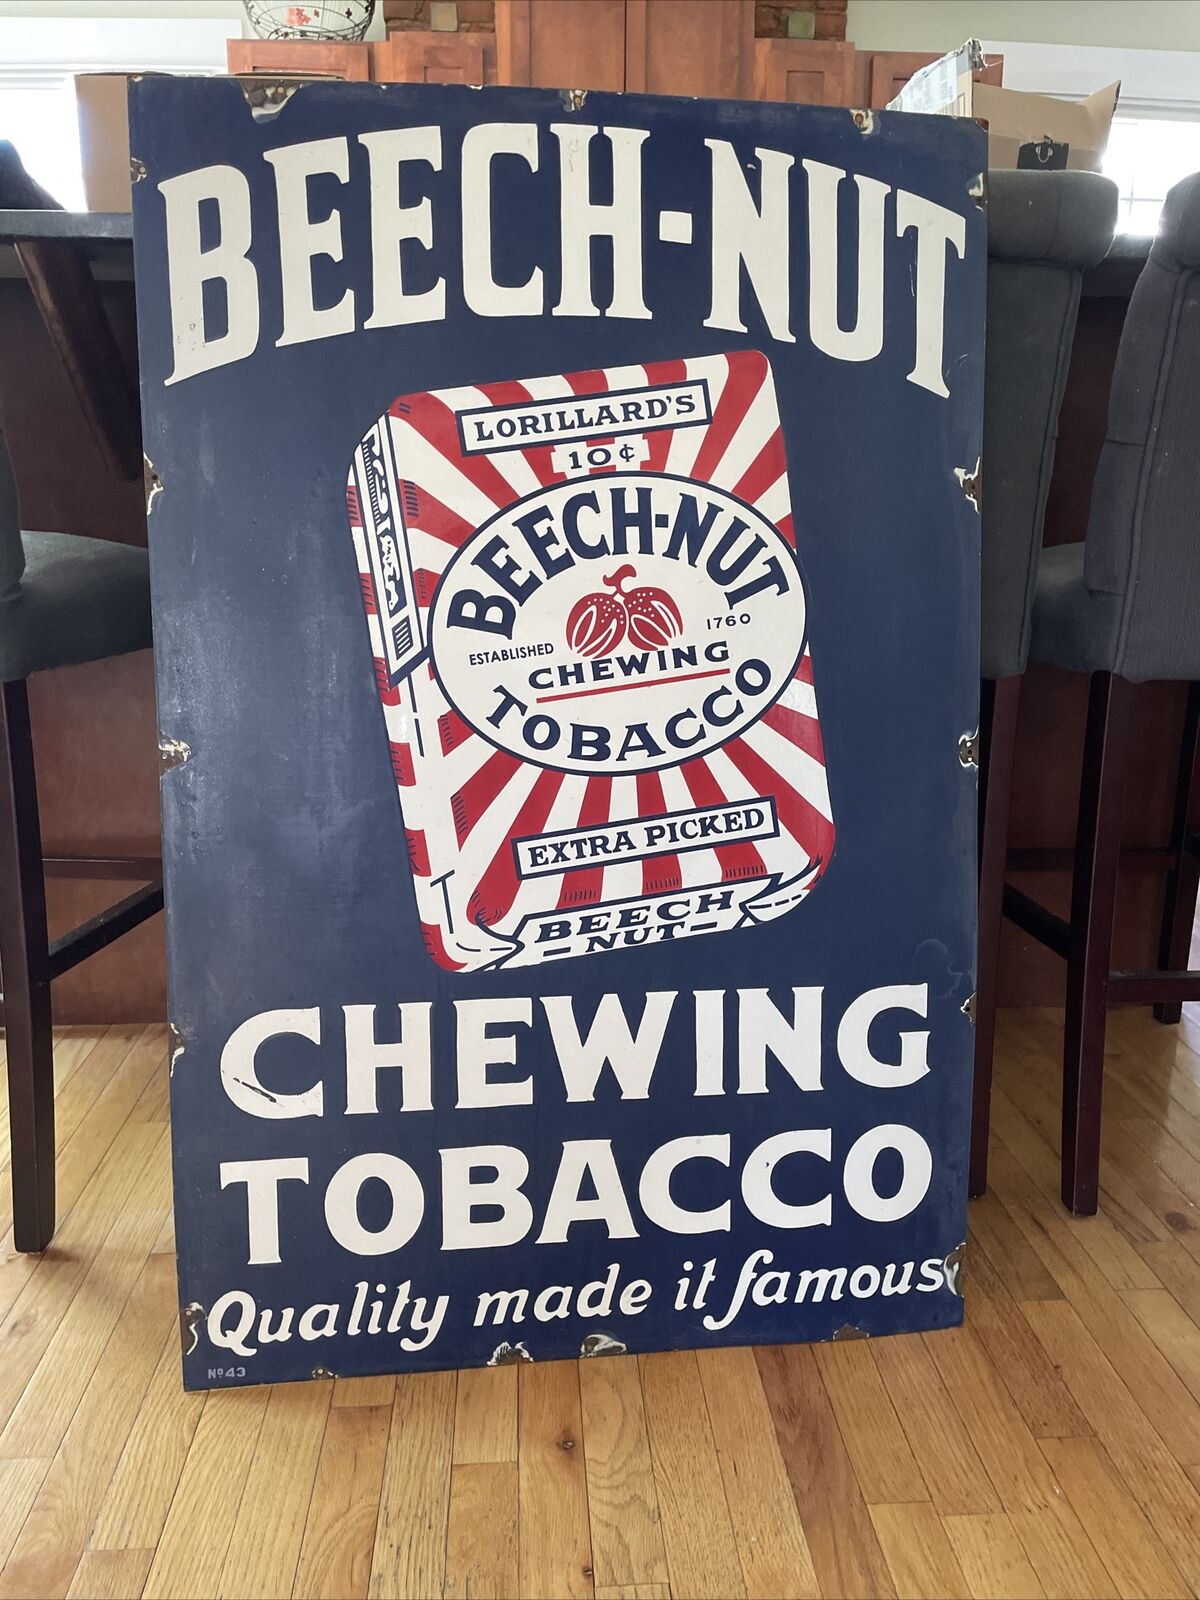 Rare Old Beech-Nut Tobacco Sign